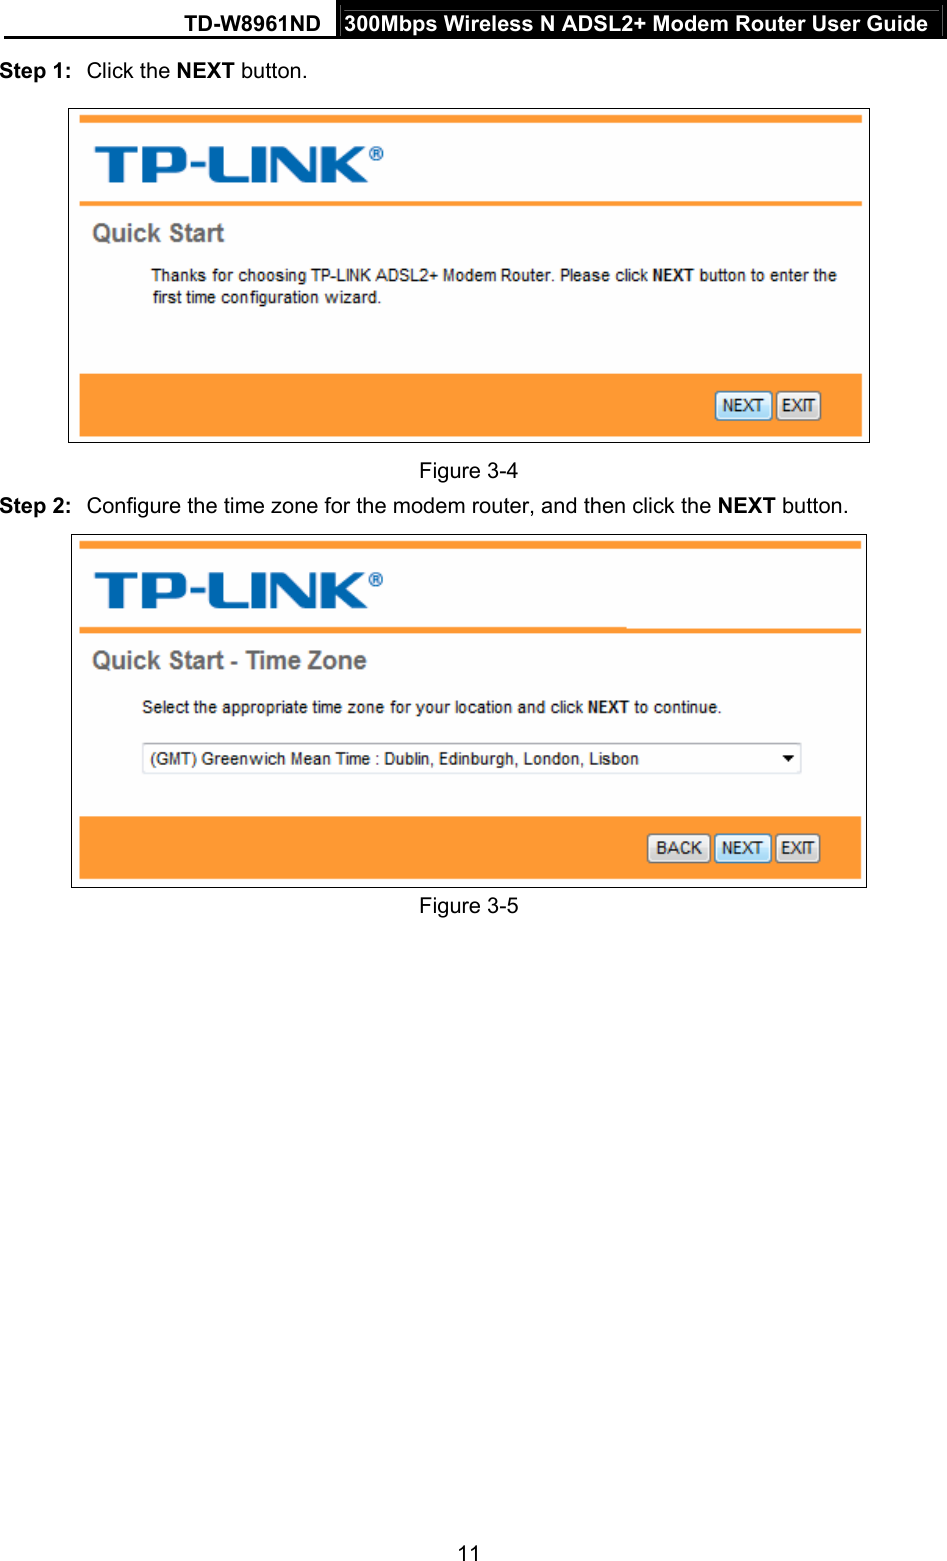 TD-W8961ND  300Mbps Wireless N ADSL2+ Modem Router User Guide  11Step 1:  Click the NEXT button.  Figure 3-4 Step 2:  Configure the time zone for the modem router, and then click the NEXT button.  Figure 3-5 